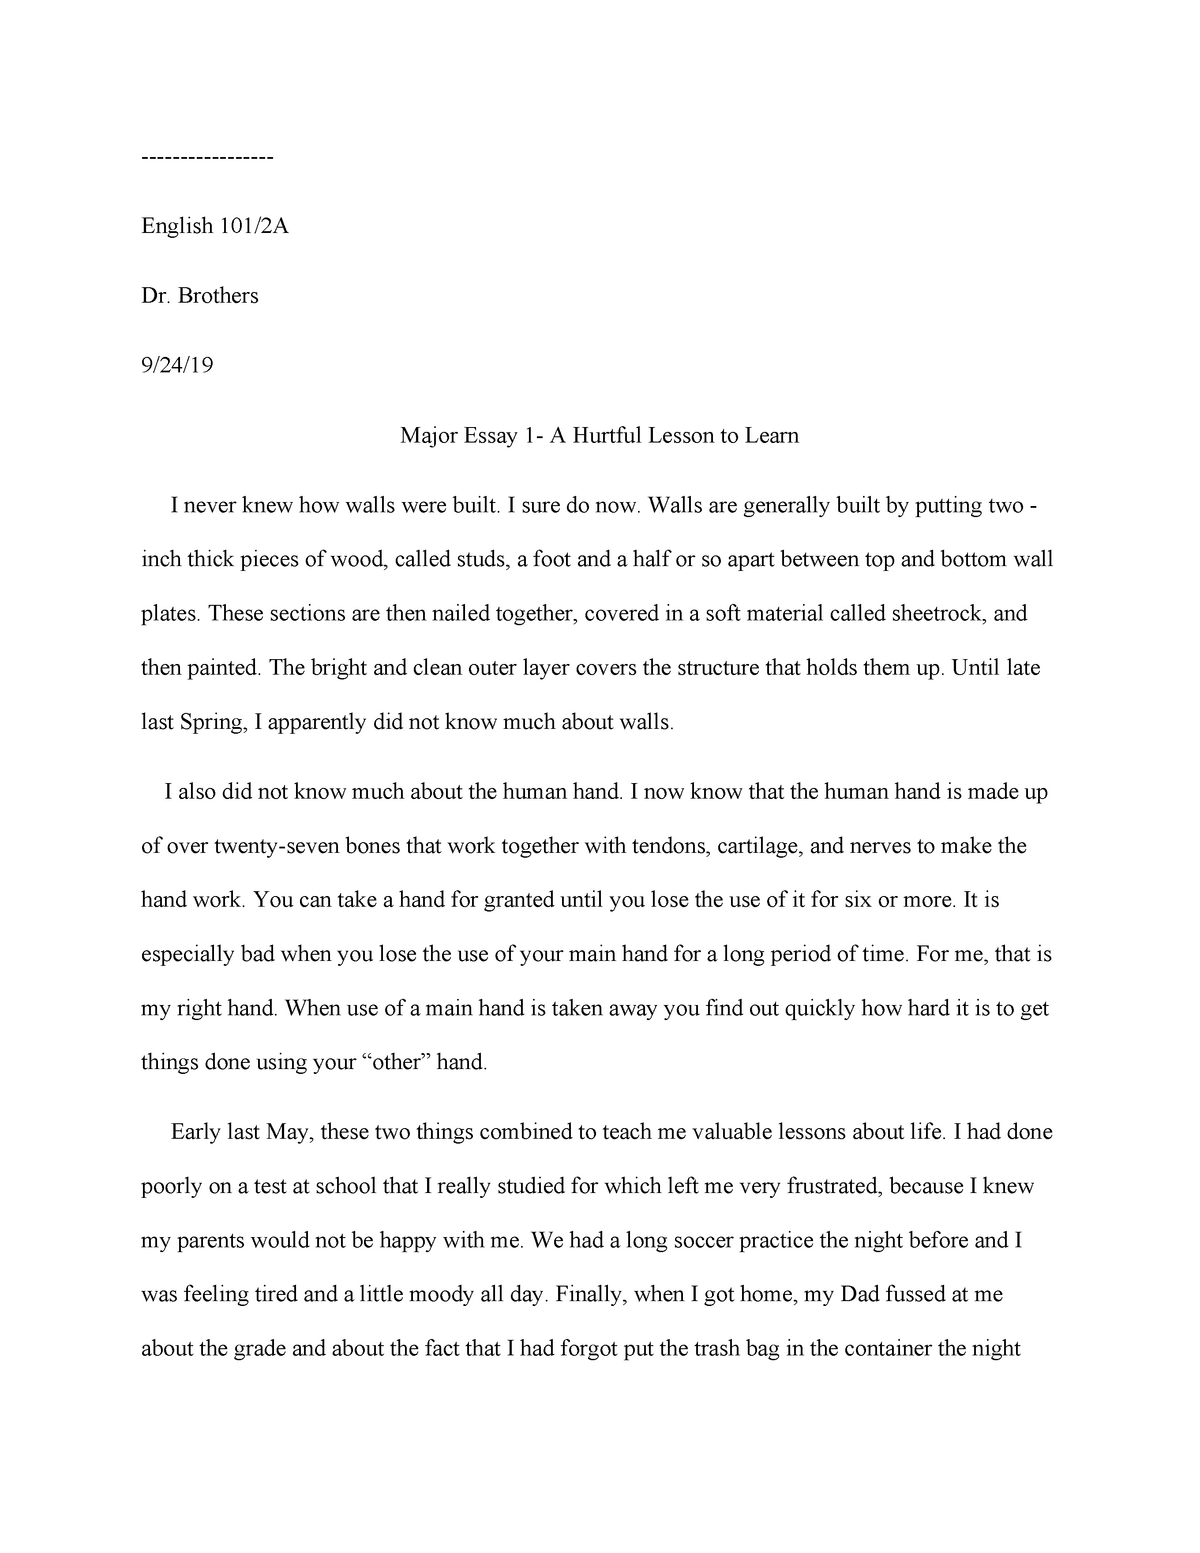 essay about lesson learned